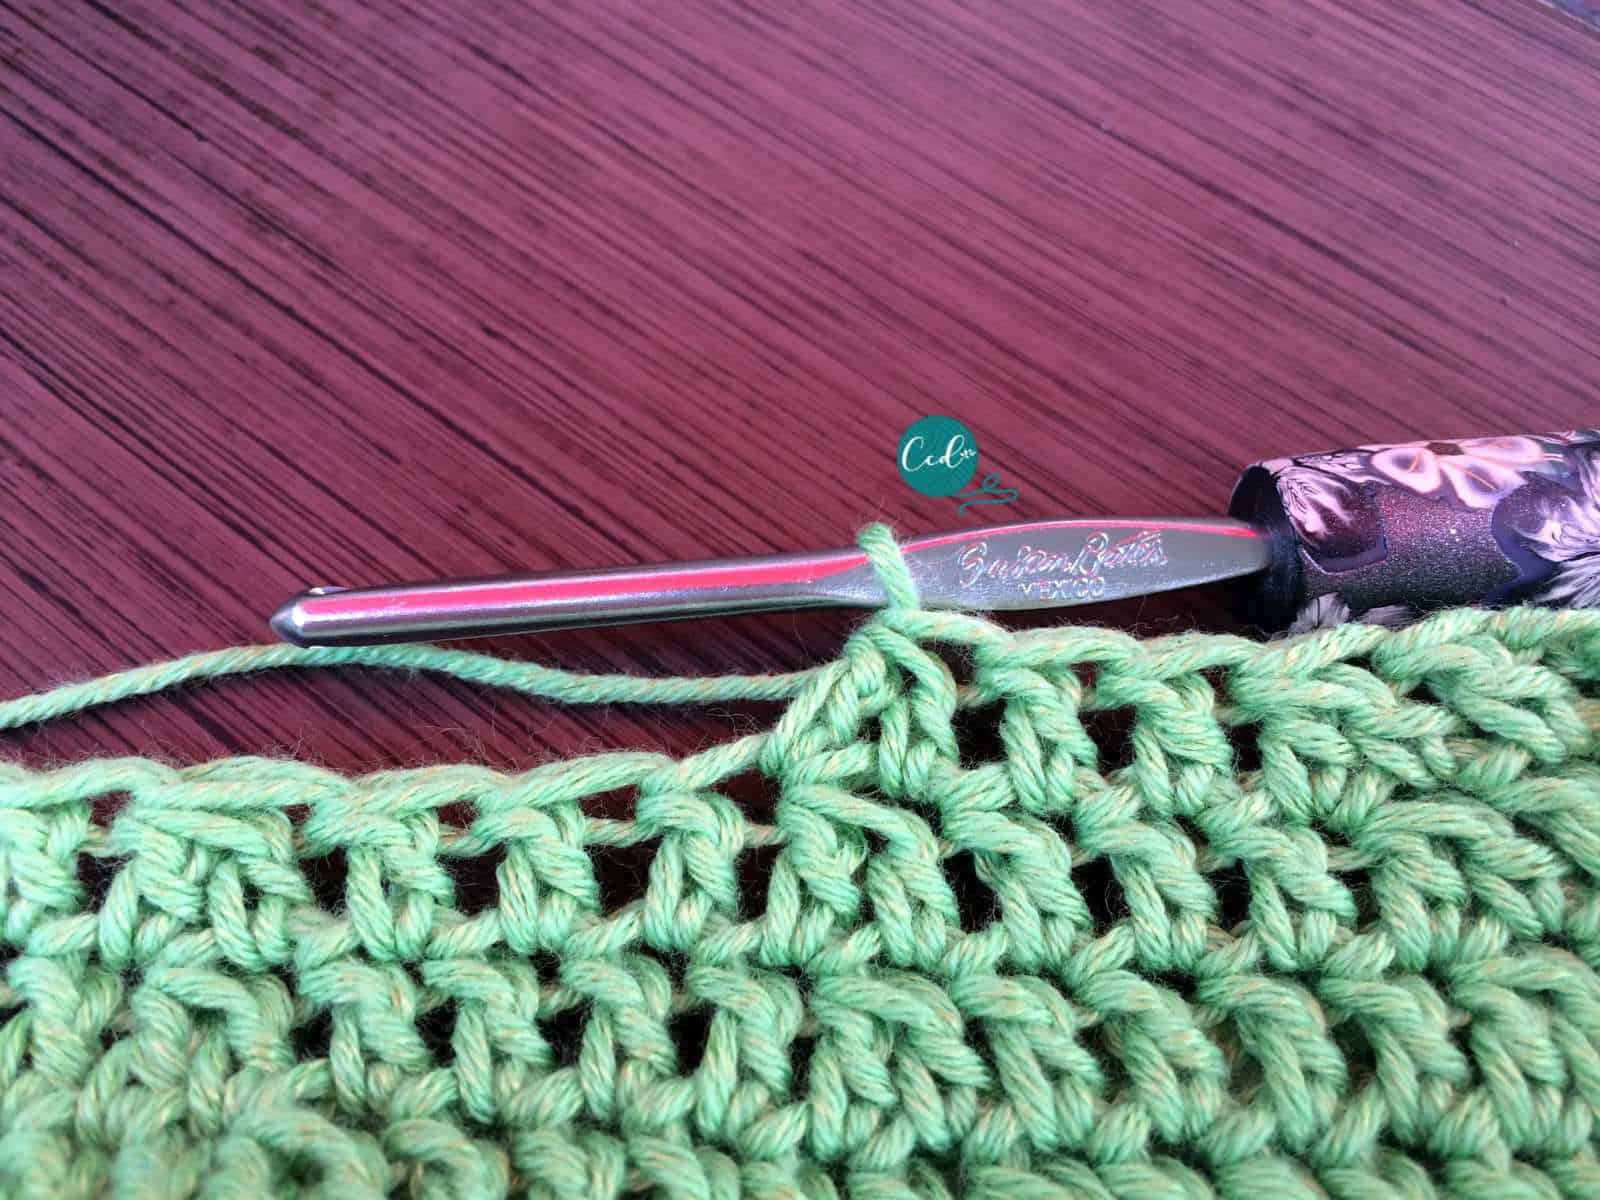 Double Crochet 2 Together (DC2tog)Tutorial + Video